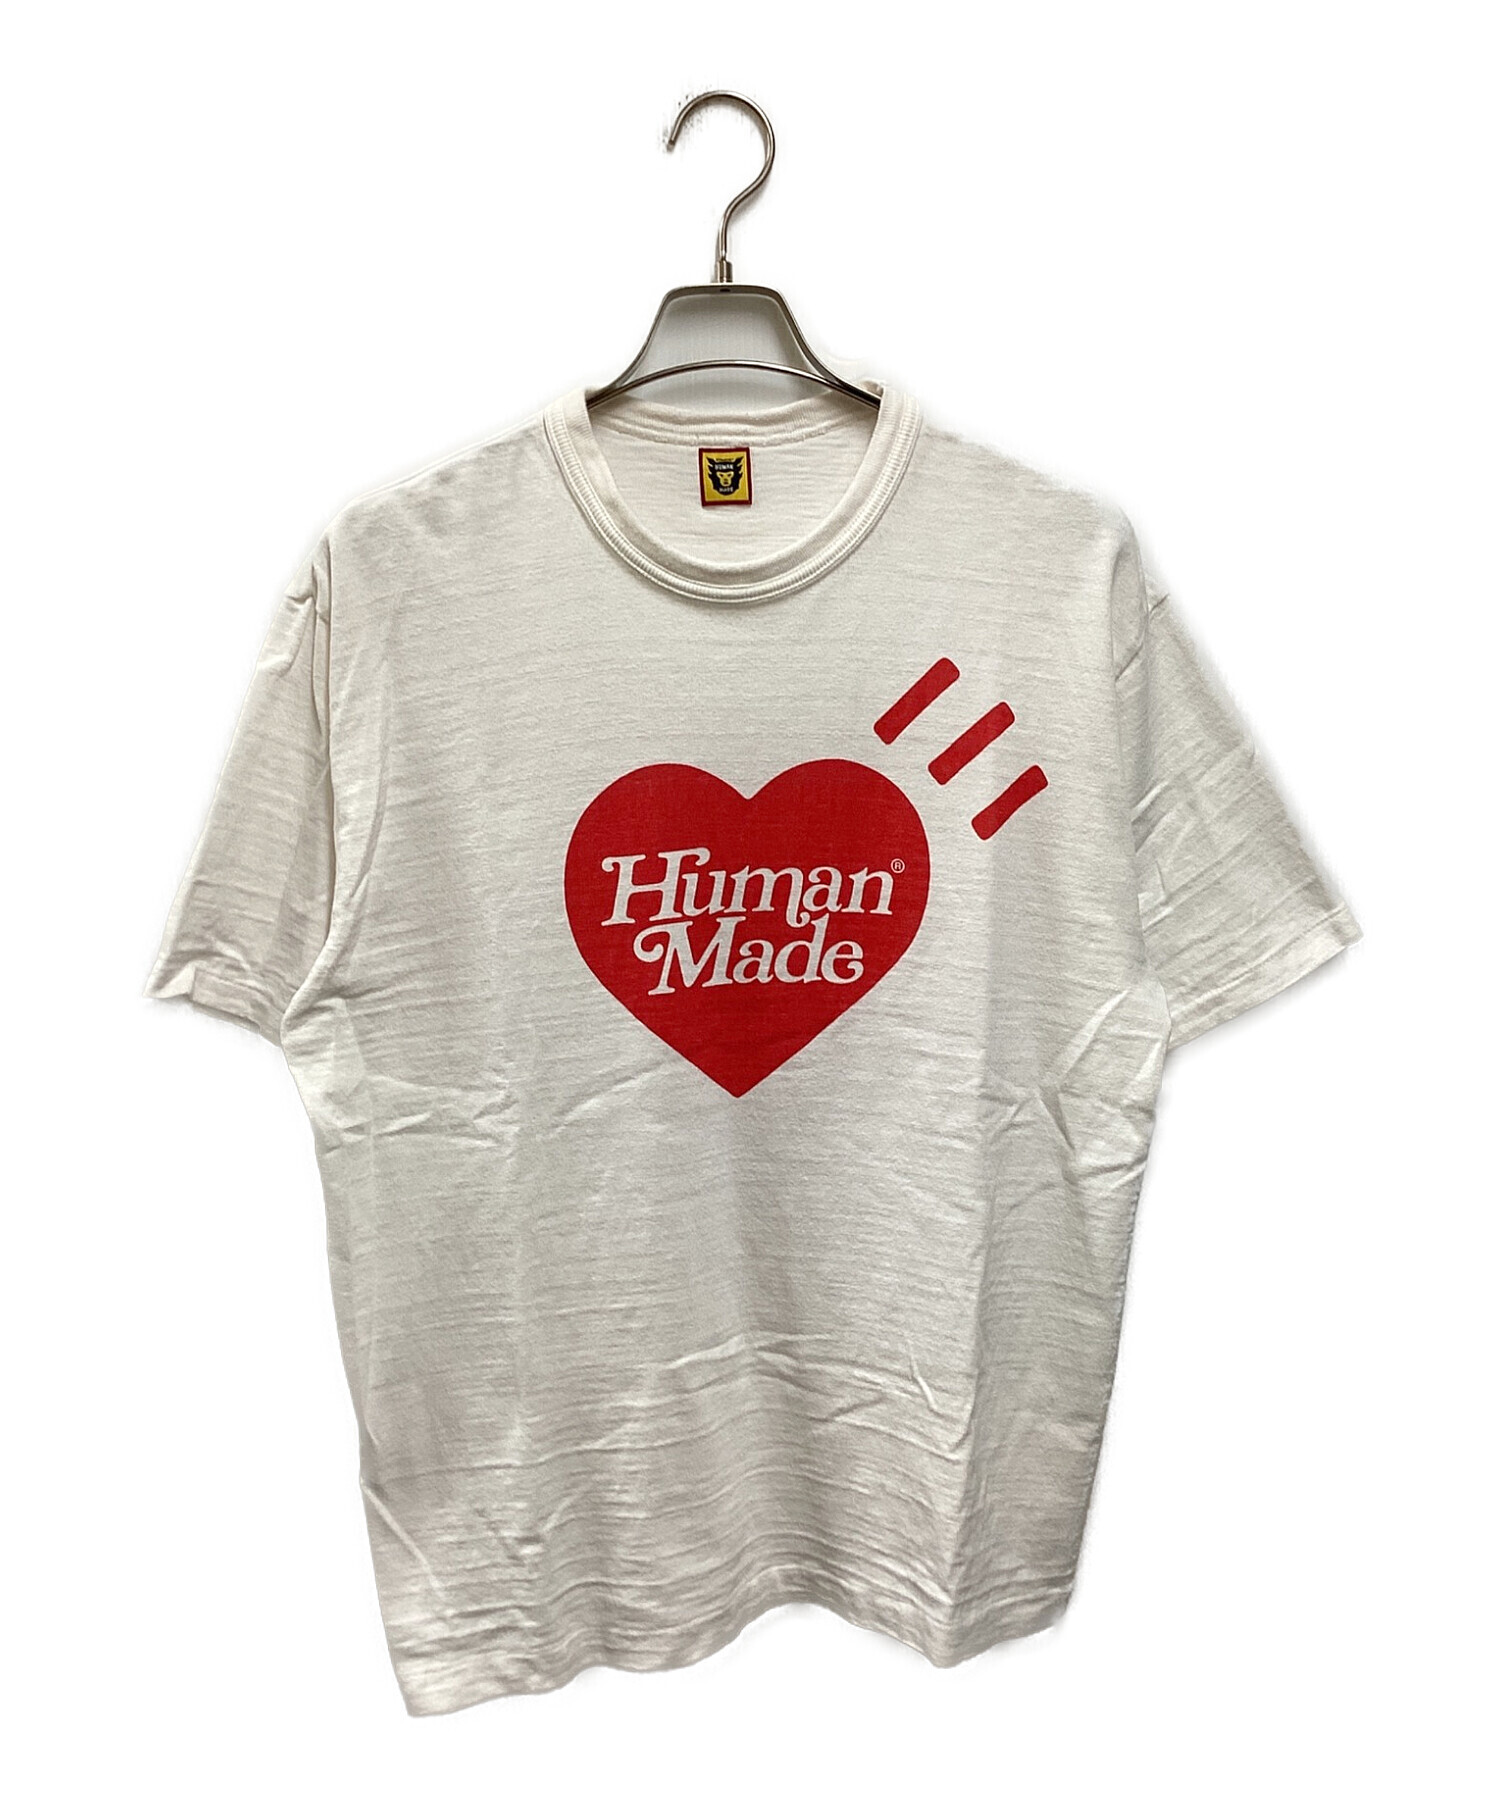 HUMAN MADE Girls Don't Cry Tシャツ XLサイズ - Tシャツ/カットソー ...